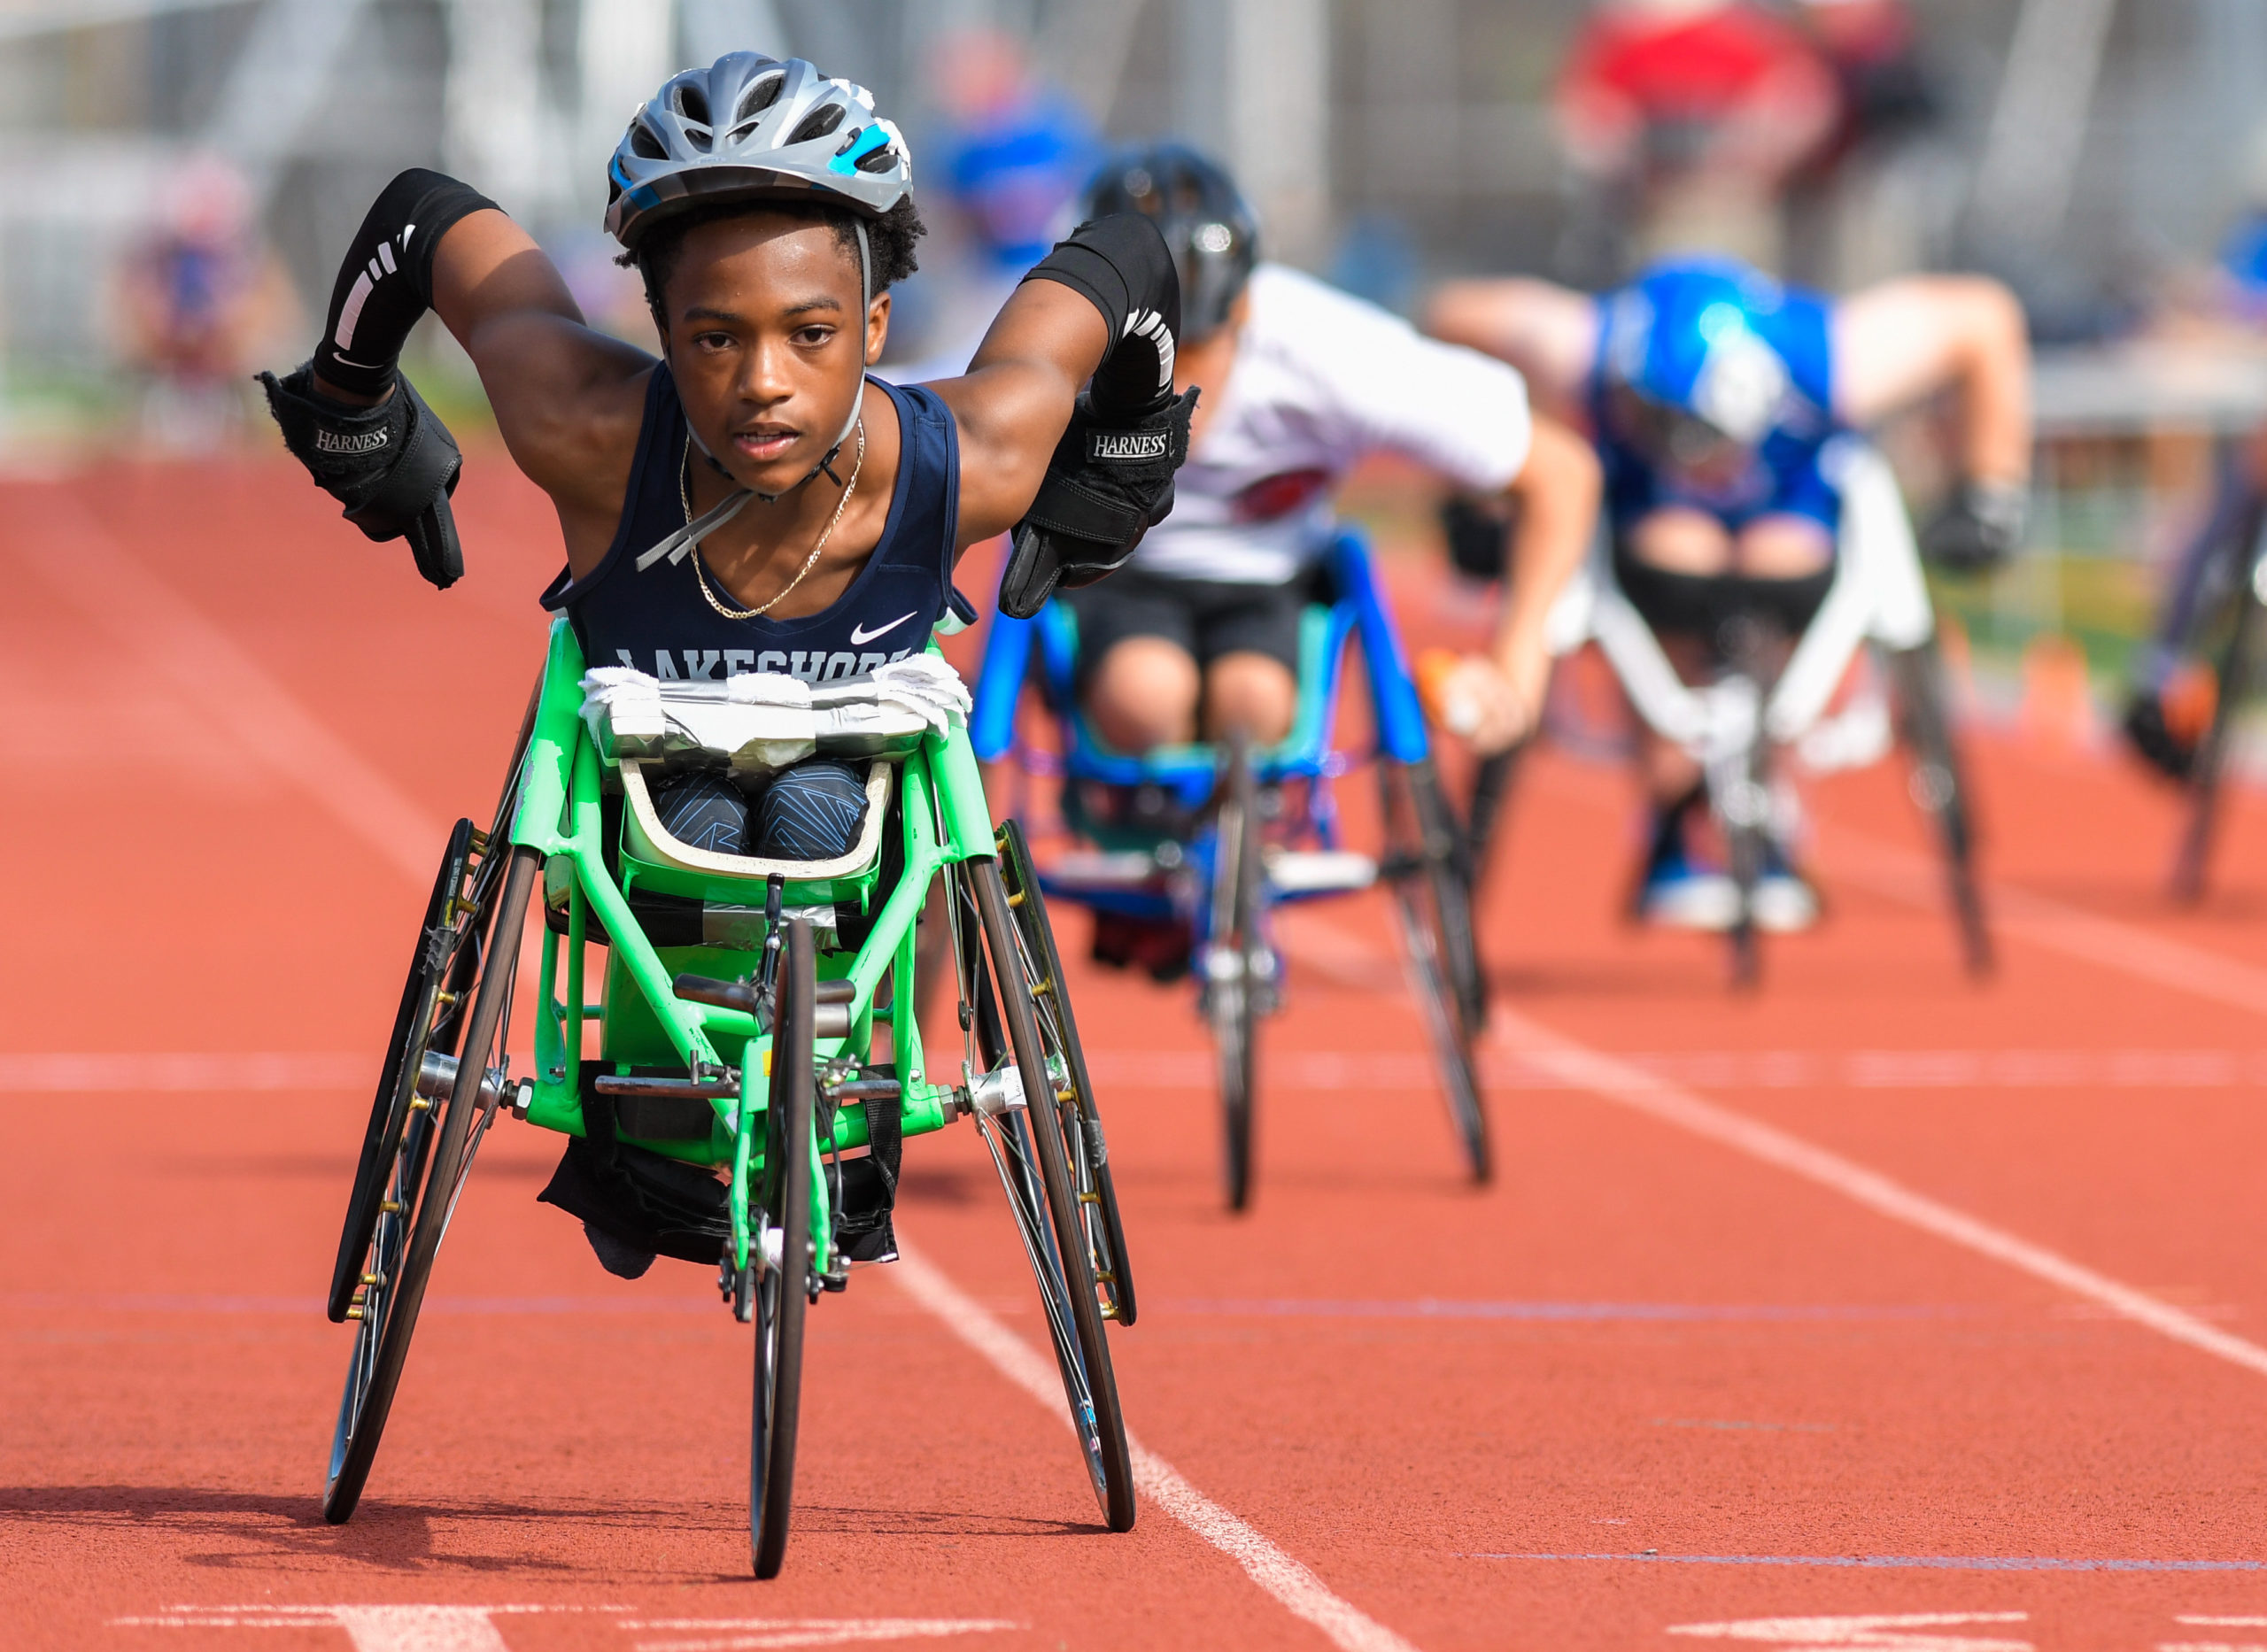 Male athlete in racing chair participating in track and field event at junior nationals.